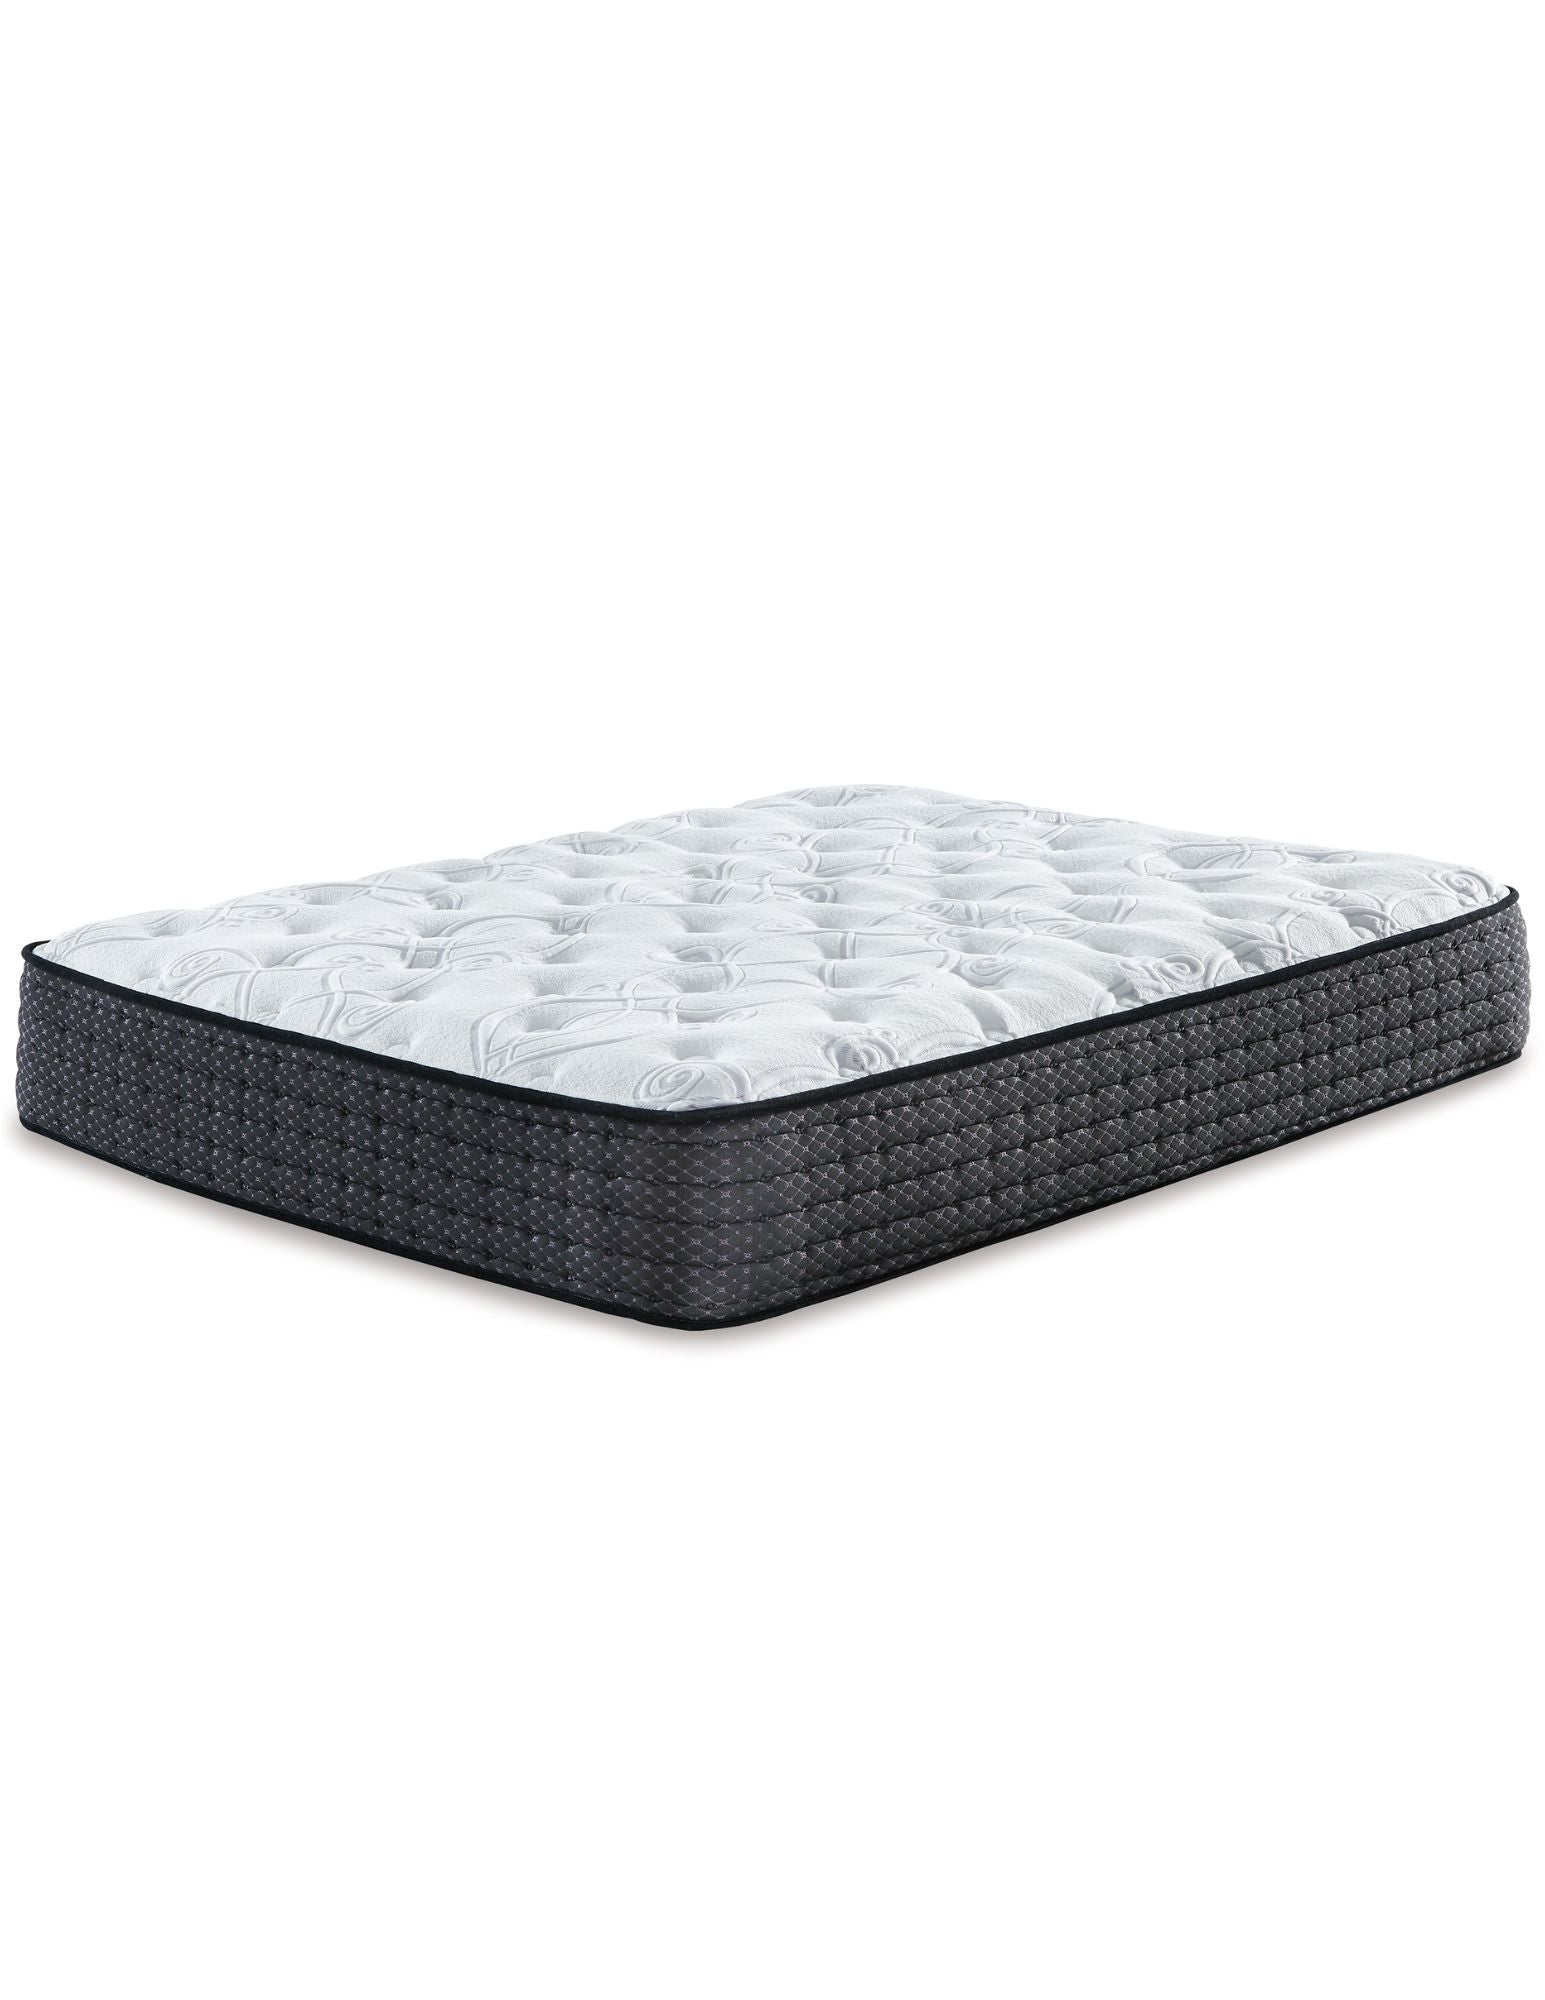 NEW Limited Edition Firm or Plush Mattress